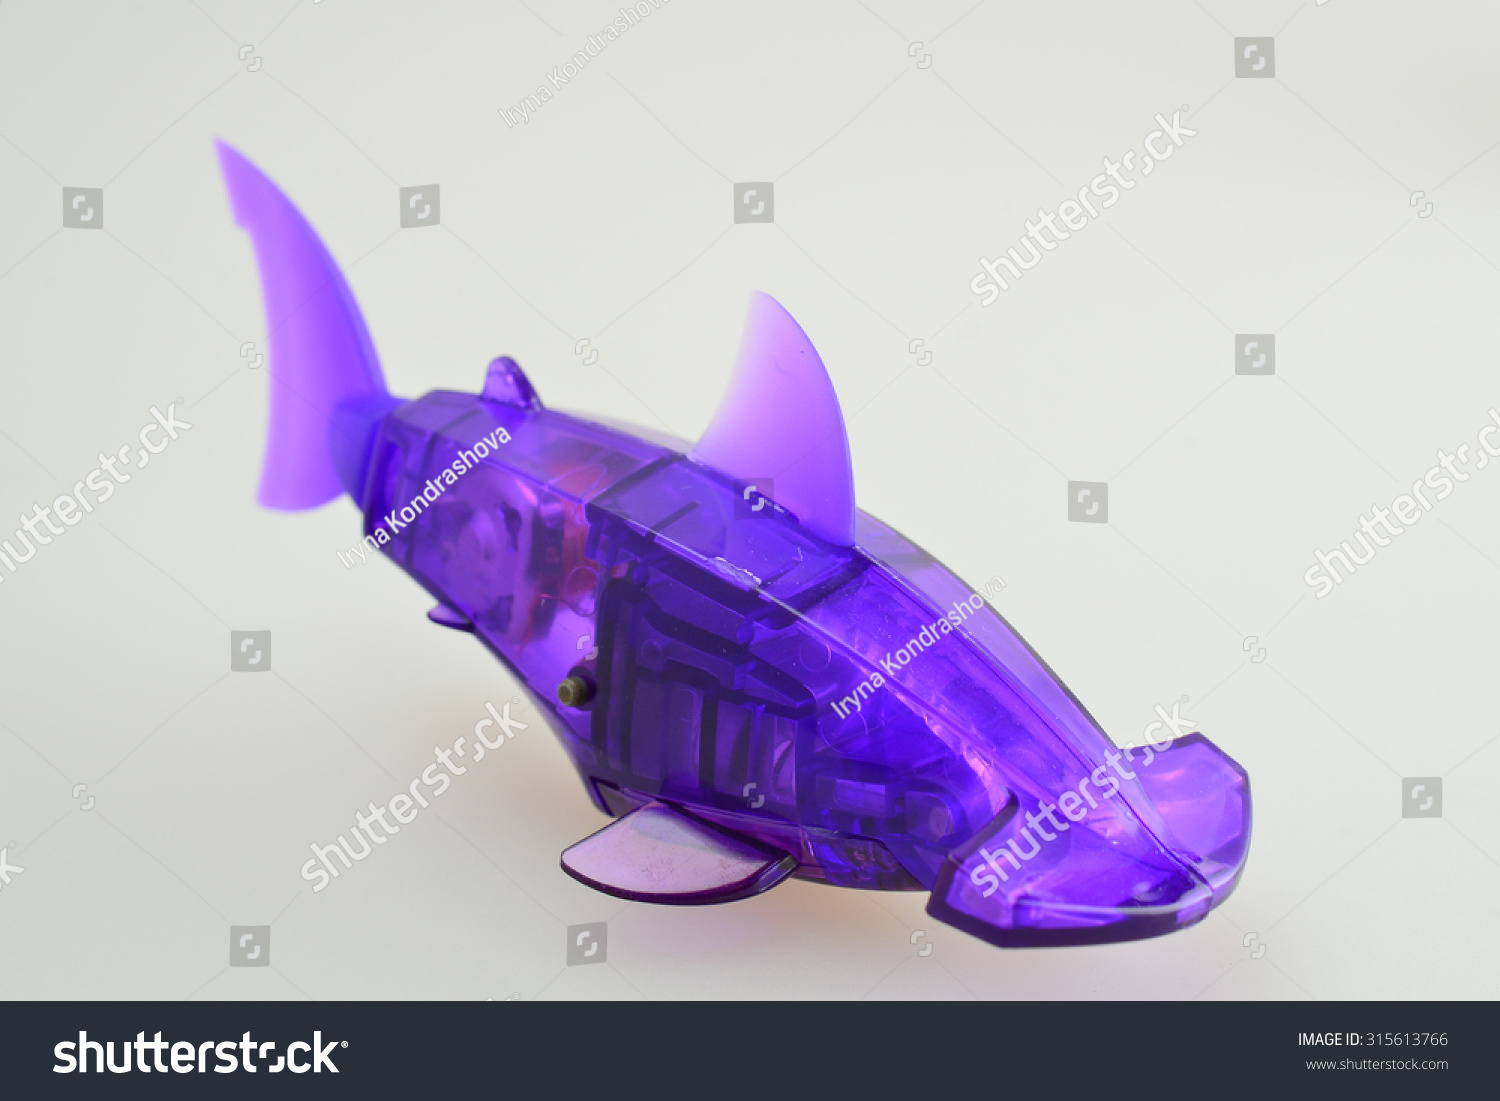 mechanical fish toy